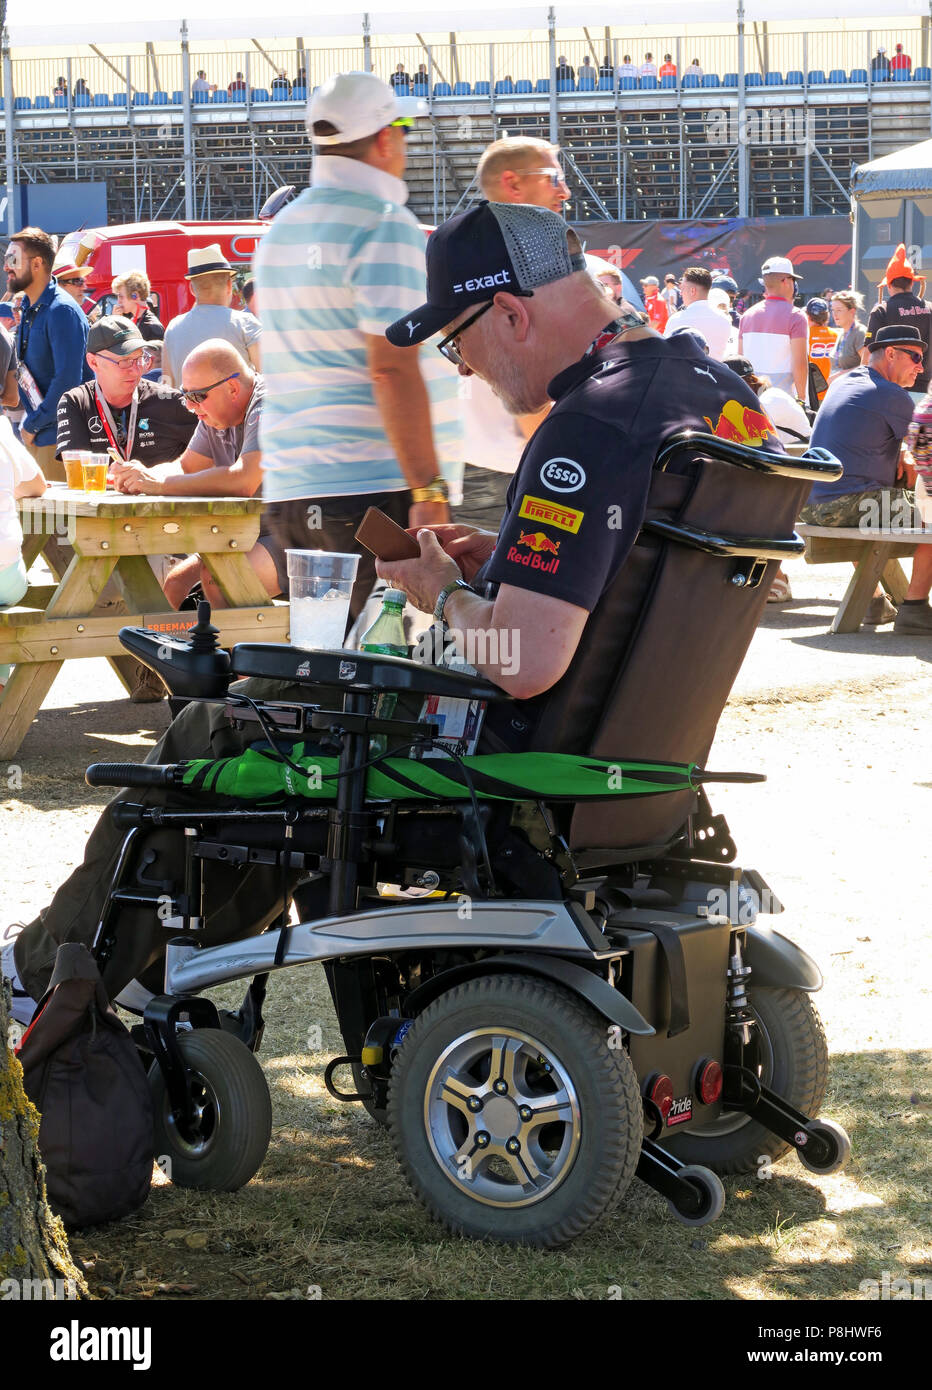 Disabled spectator, at the British Grand Prix, Silverstone Circuit, Towcester, Northamptonshire, England, UK Stock Photo